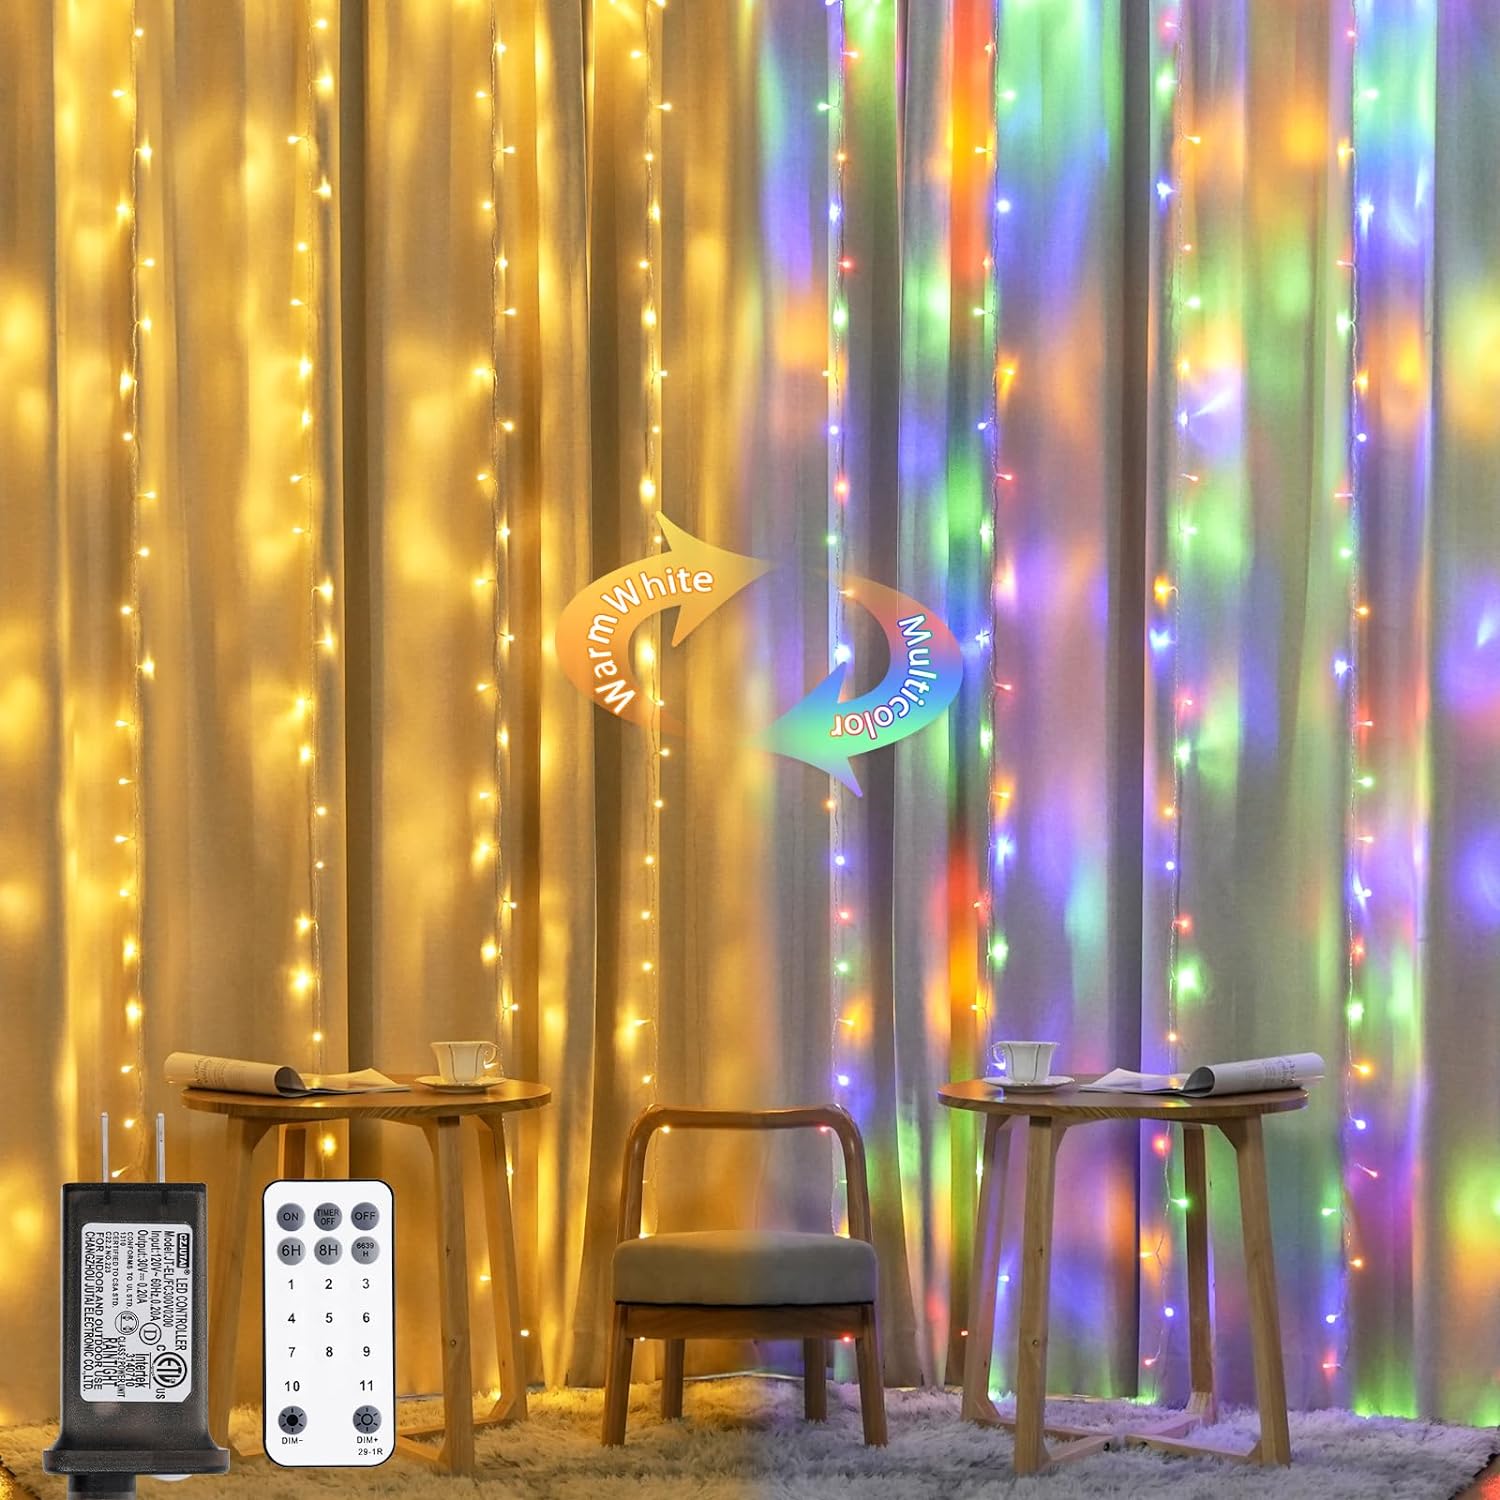 JMEXSUSS 300LED Dual Color Changing Curtain Lights with Remote, 9.8 x 9.8ft Connectable Plug in Christmas String Lights with 11 Modes for Bedroom Backdrop Outdoor Decor, Warm White to Multicolor